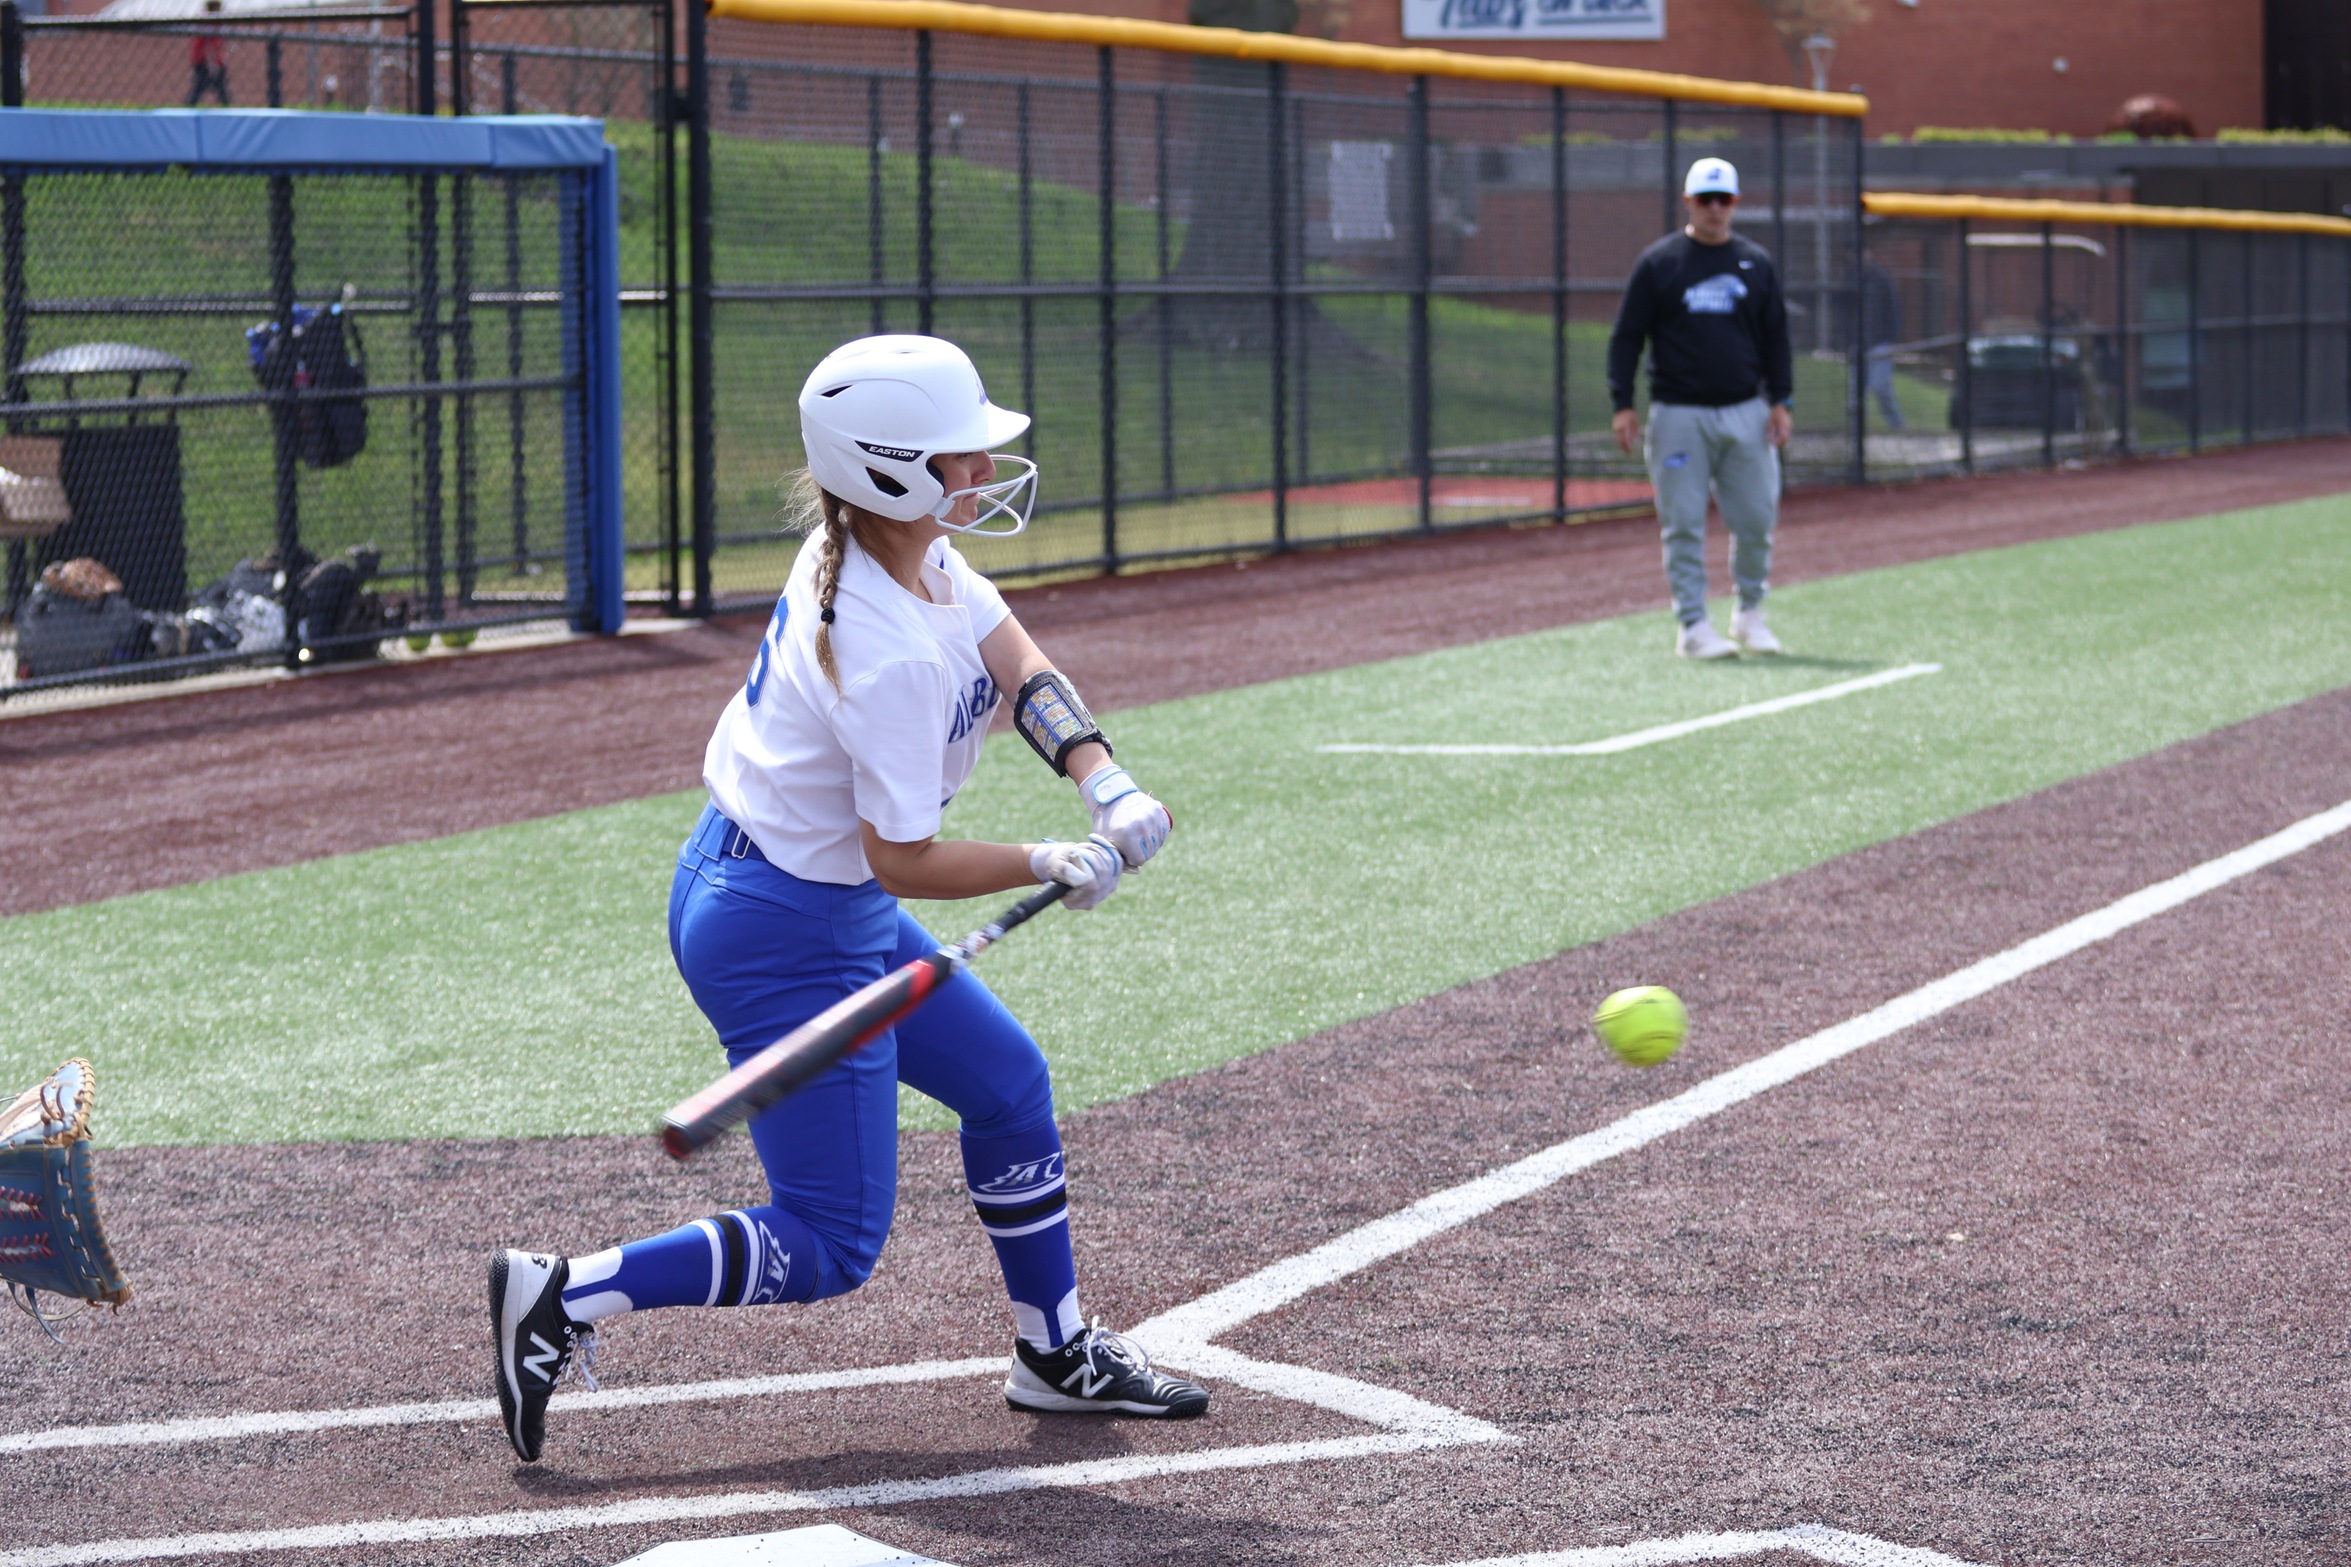 Softball Drops Both Ends Of Doubleheader To Lasell